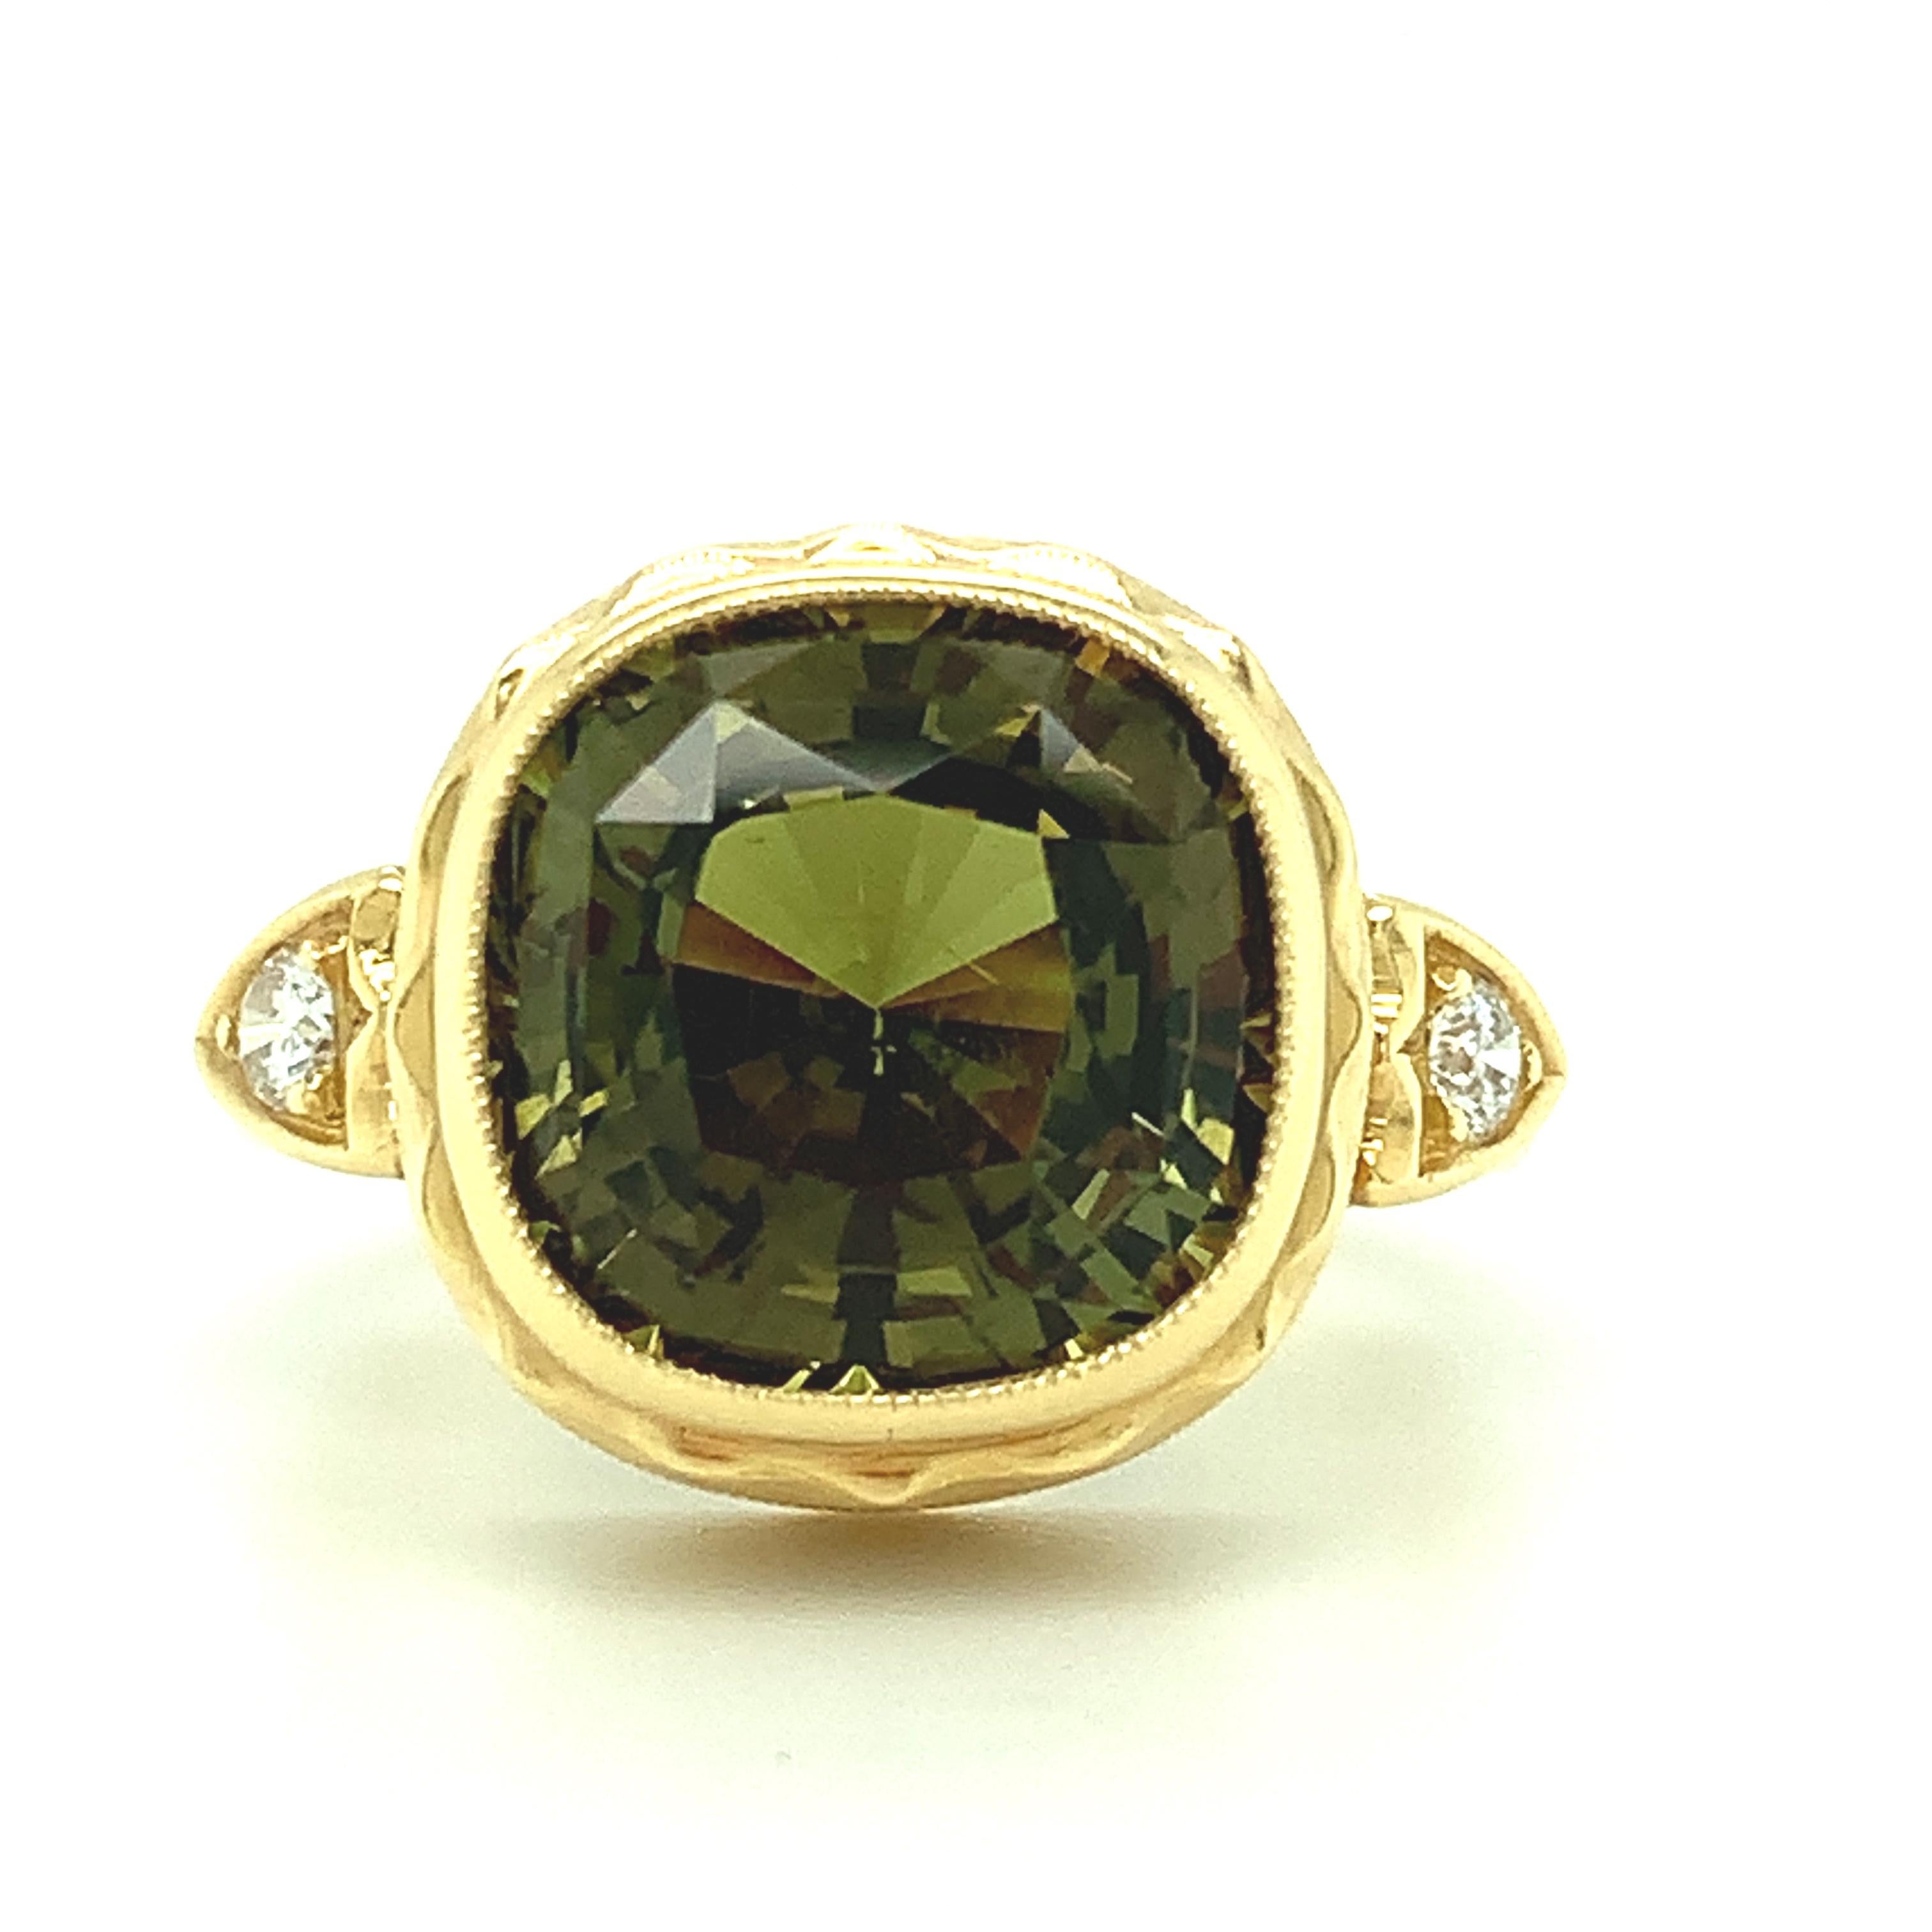 This handmade 18k yellow gold ring features a beautiful 8.16 carat, cushion cut chrysoberyl with extraordinary brilliance and life! The ring was designed to showcase this gorgeous gem, whose sparkling facets reflect a blend of striking olive green